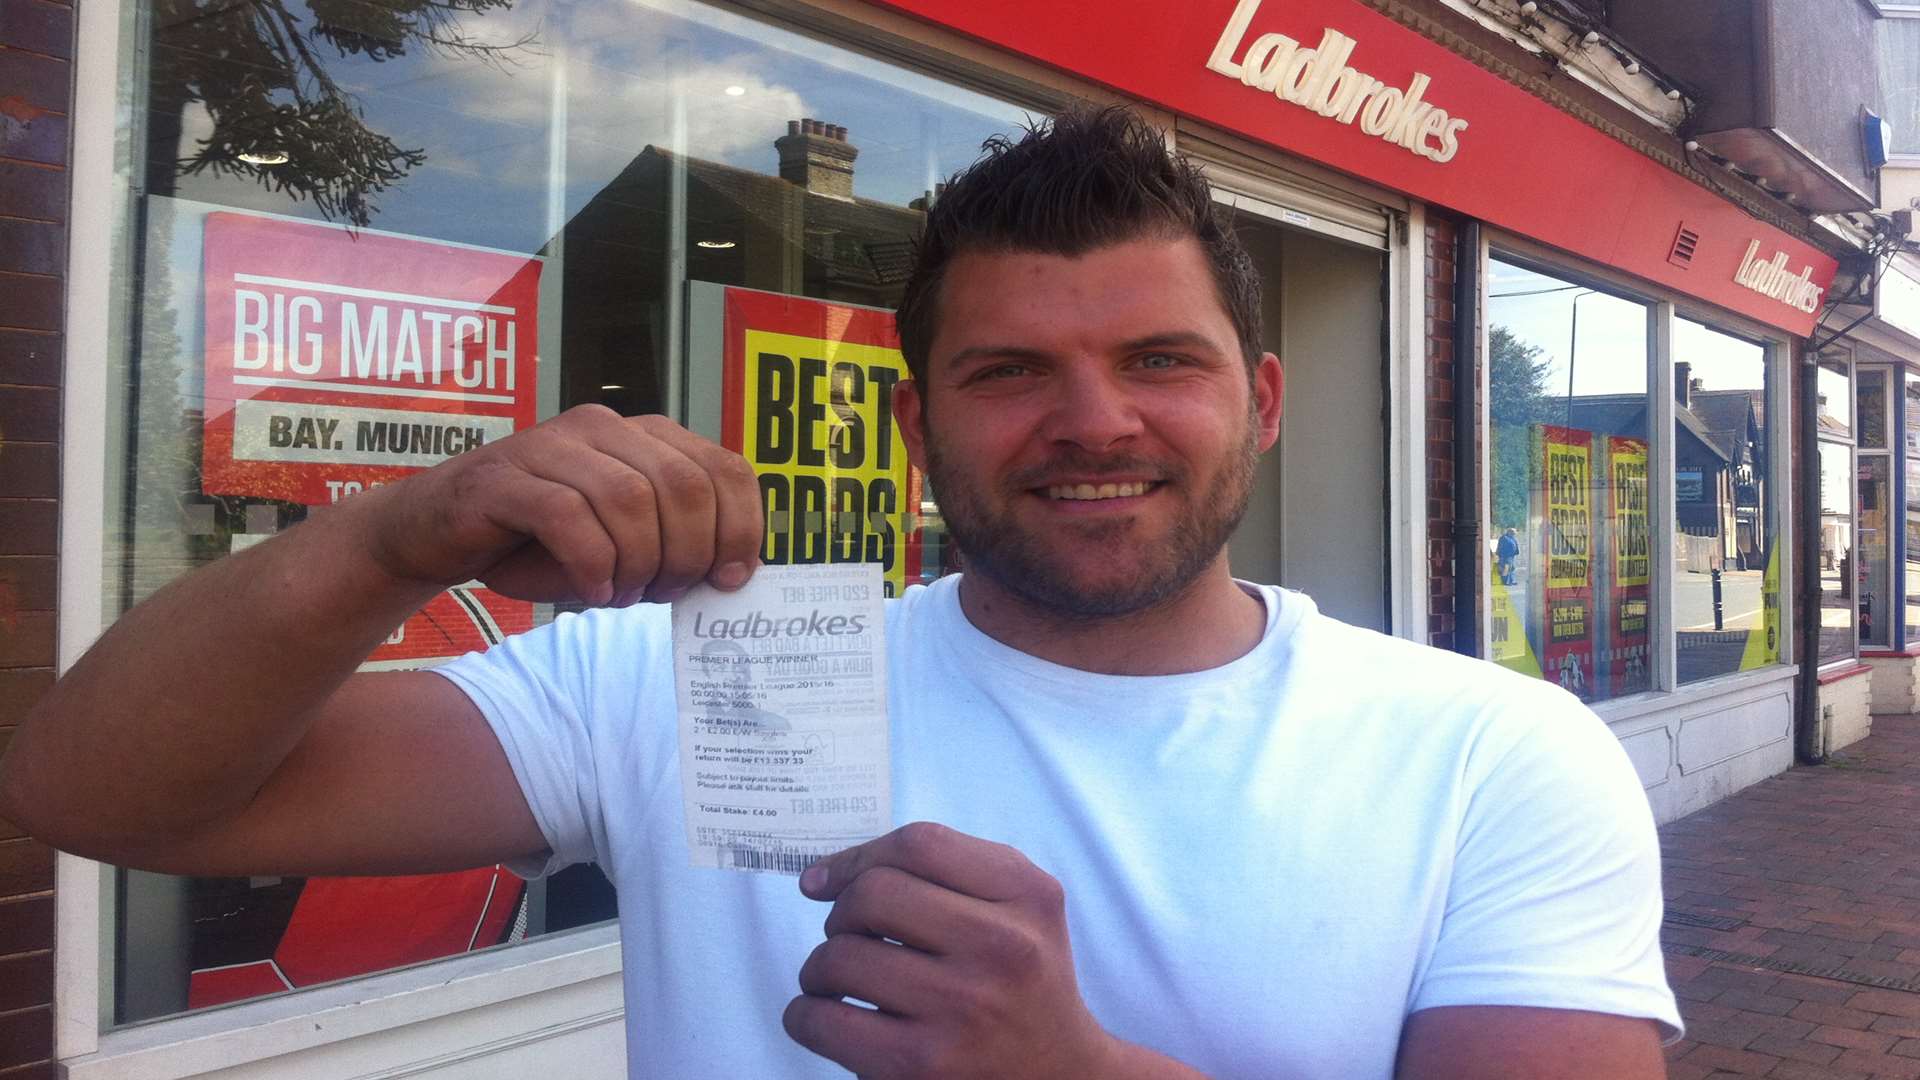 Billy Bleach with his betting slip outside the shop where he placed his bet